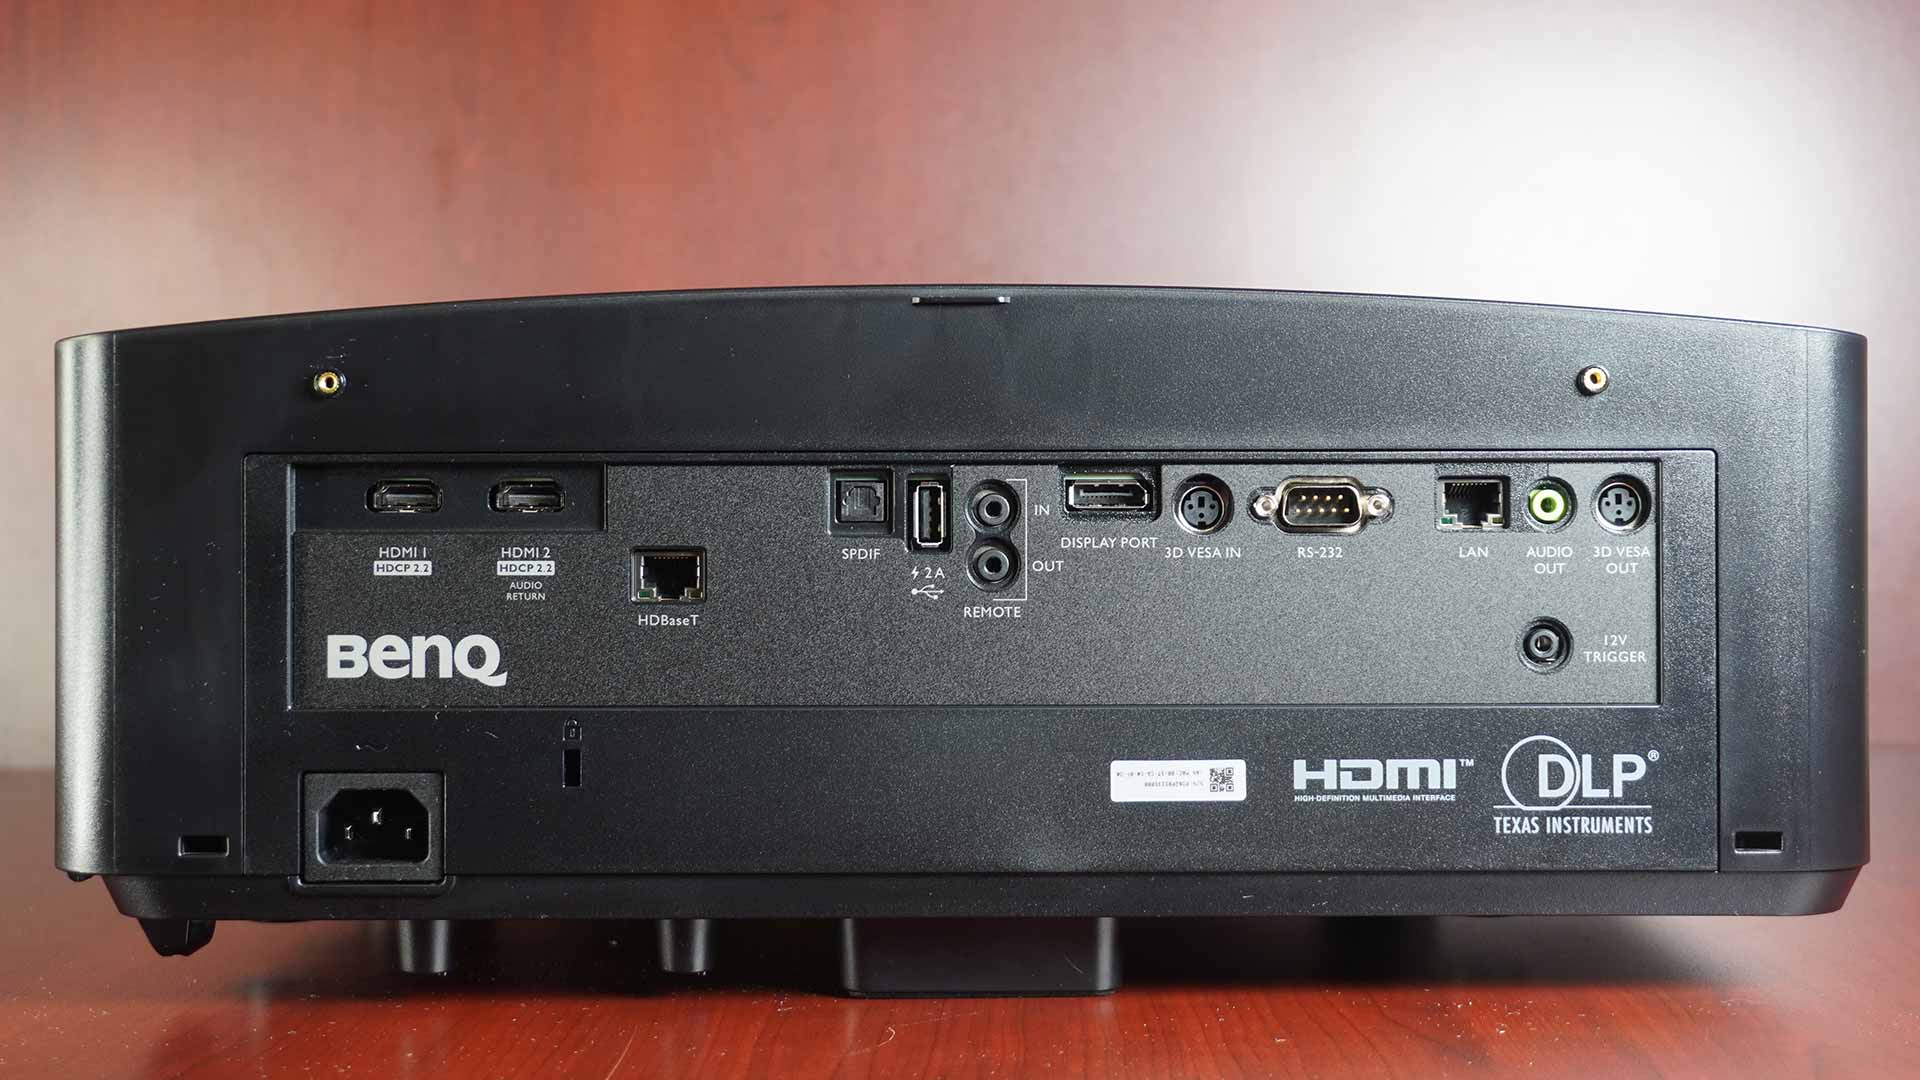 Xgimi Mogo 2 Pro Is Equipped With A Single Hdmi 2.0 Port - Projector Reviews - Image